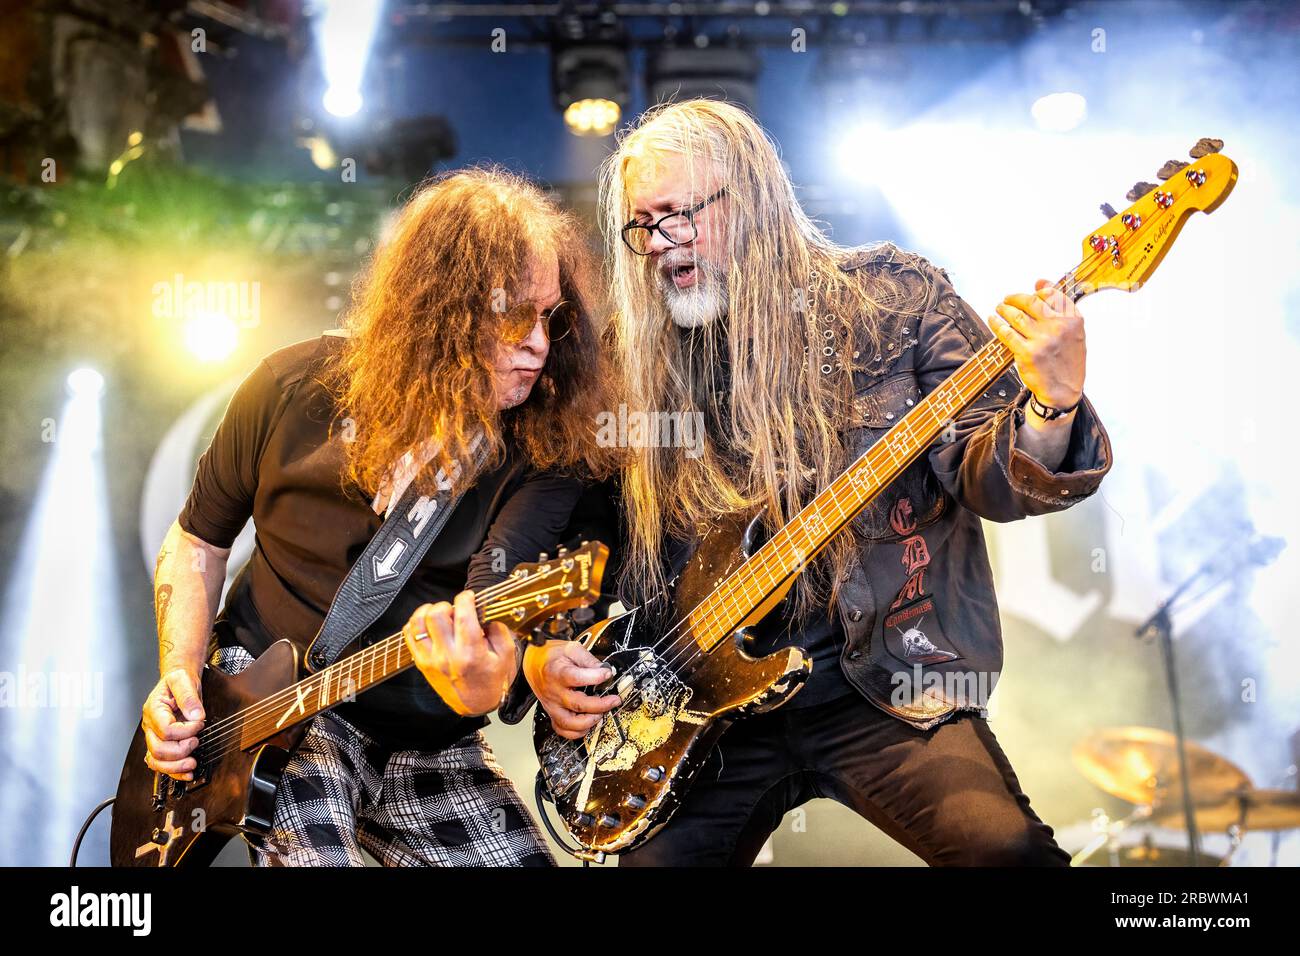 Oslo, Norway. 24th, June 2023. The Swedish doom metal band Candlemass performs a live concert during the Norwegian music festival Tons of Rock 2023 in Oslo. Here bass player Leif Edling is seen live on stage with guitarist Mats Björkman. (Photo credit: Gonzales Photo - Terje Dokken). Stock Photo